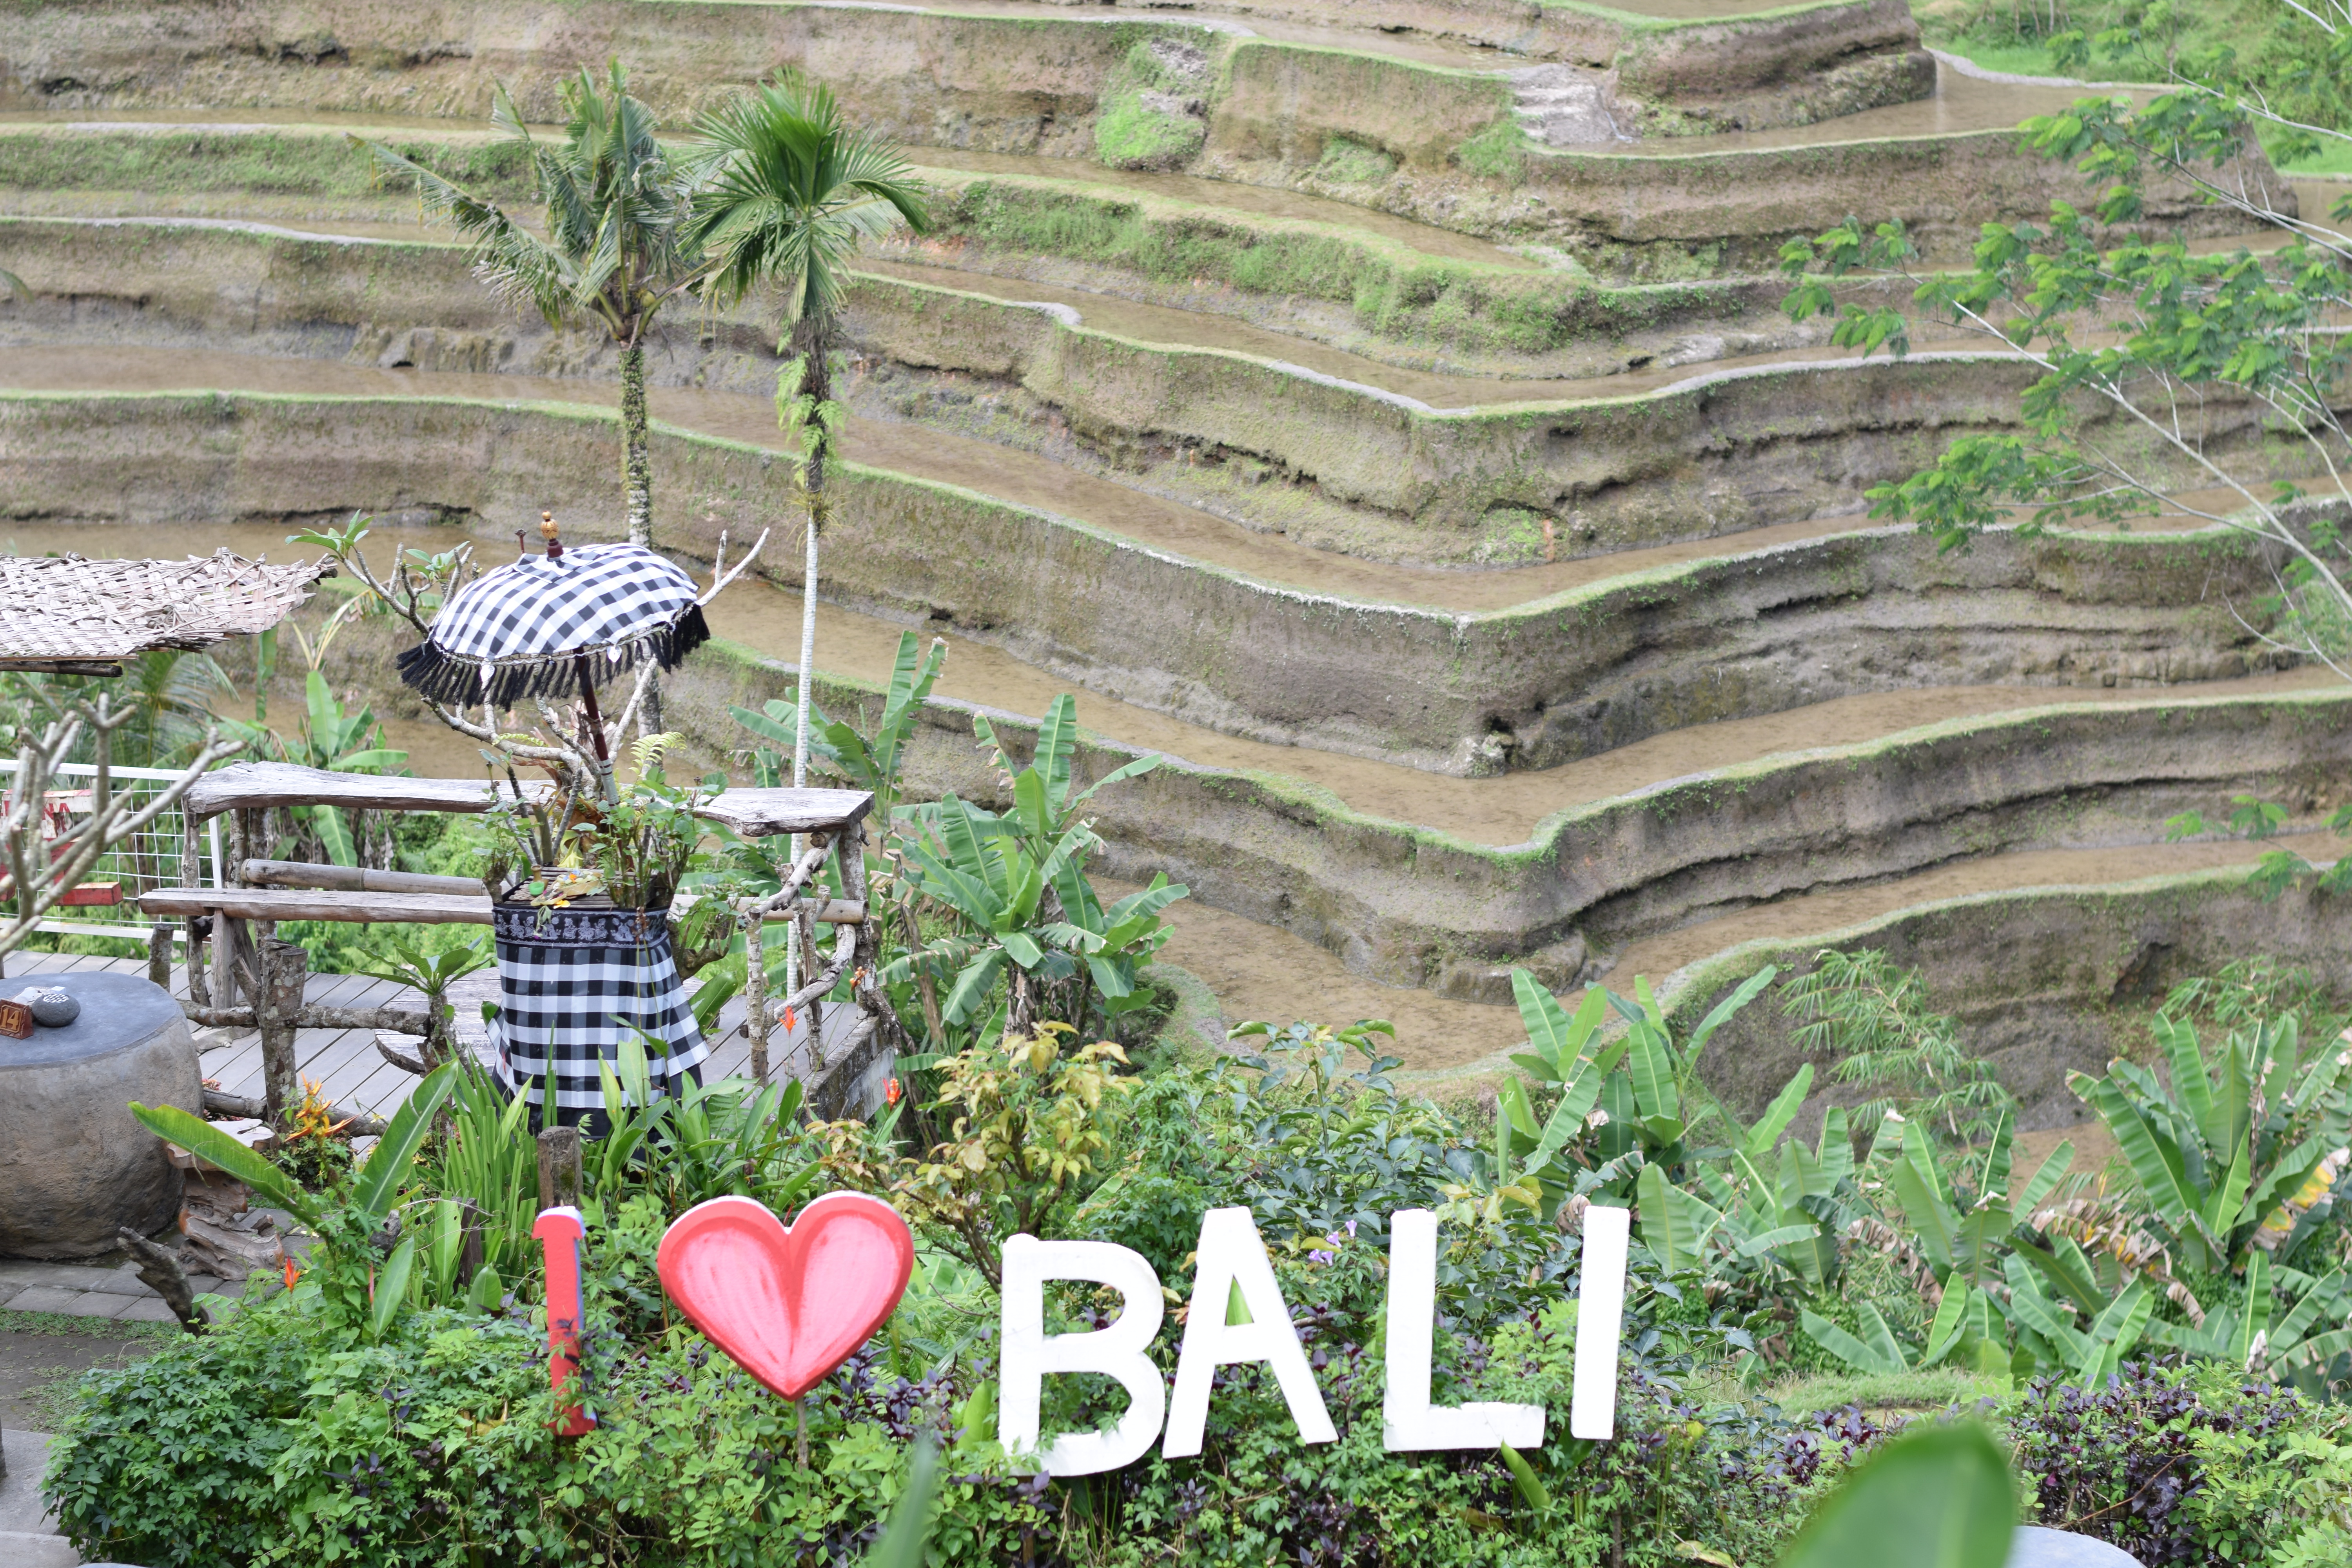 Our Trip To Bali At A Glance